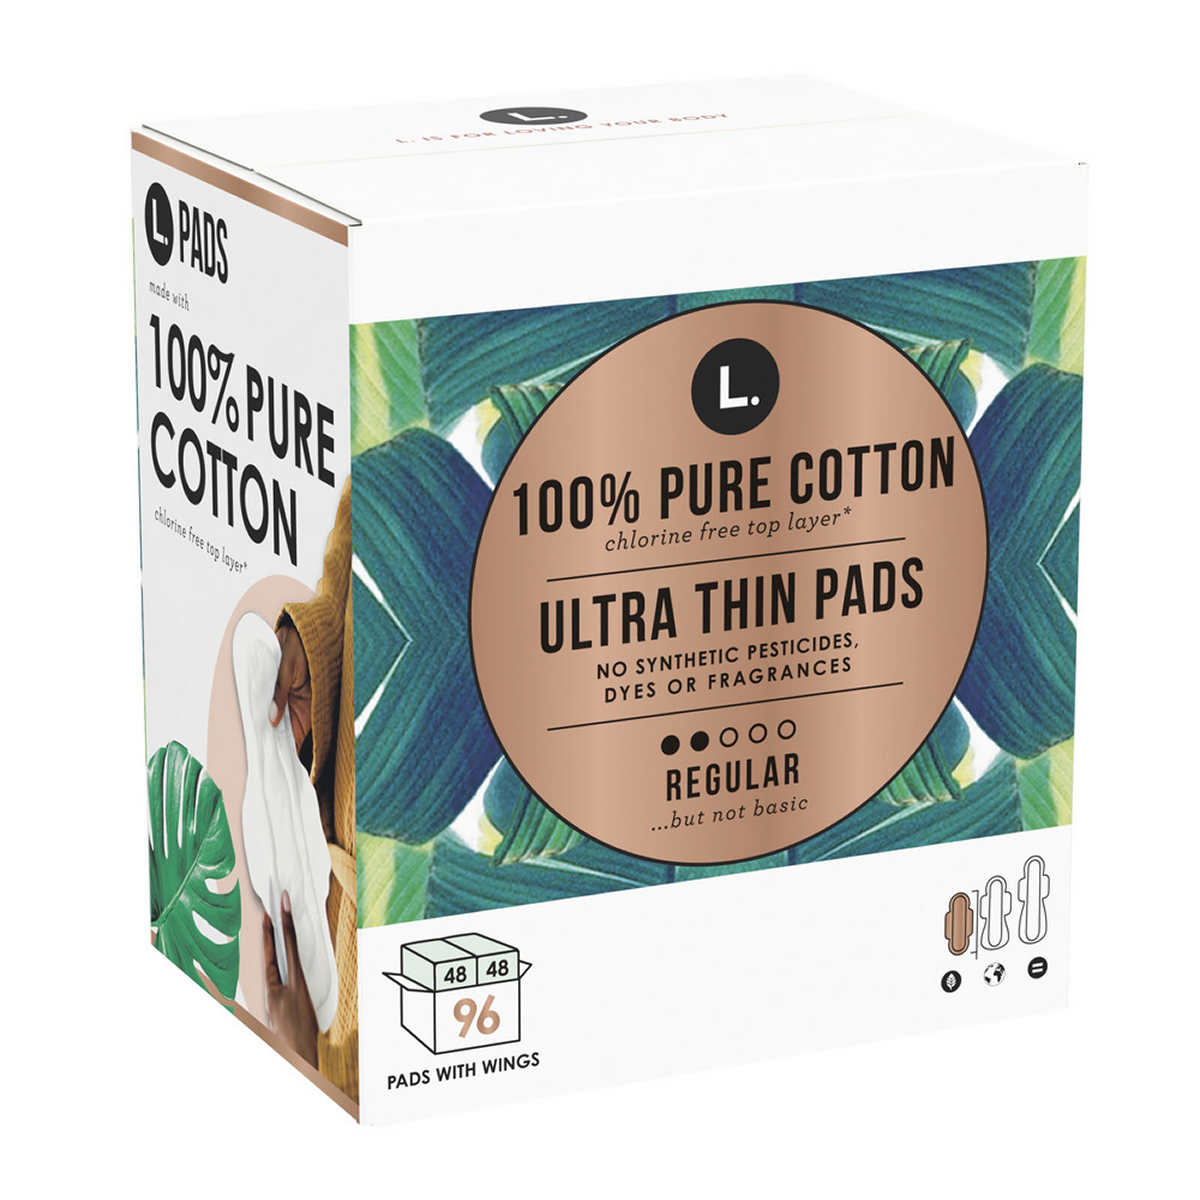 L. Ultra Thin Pads, 96-count